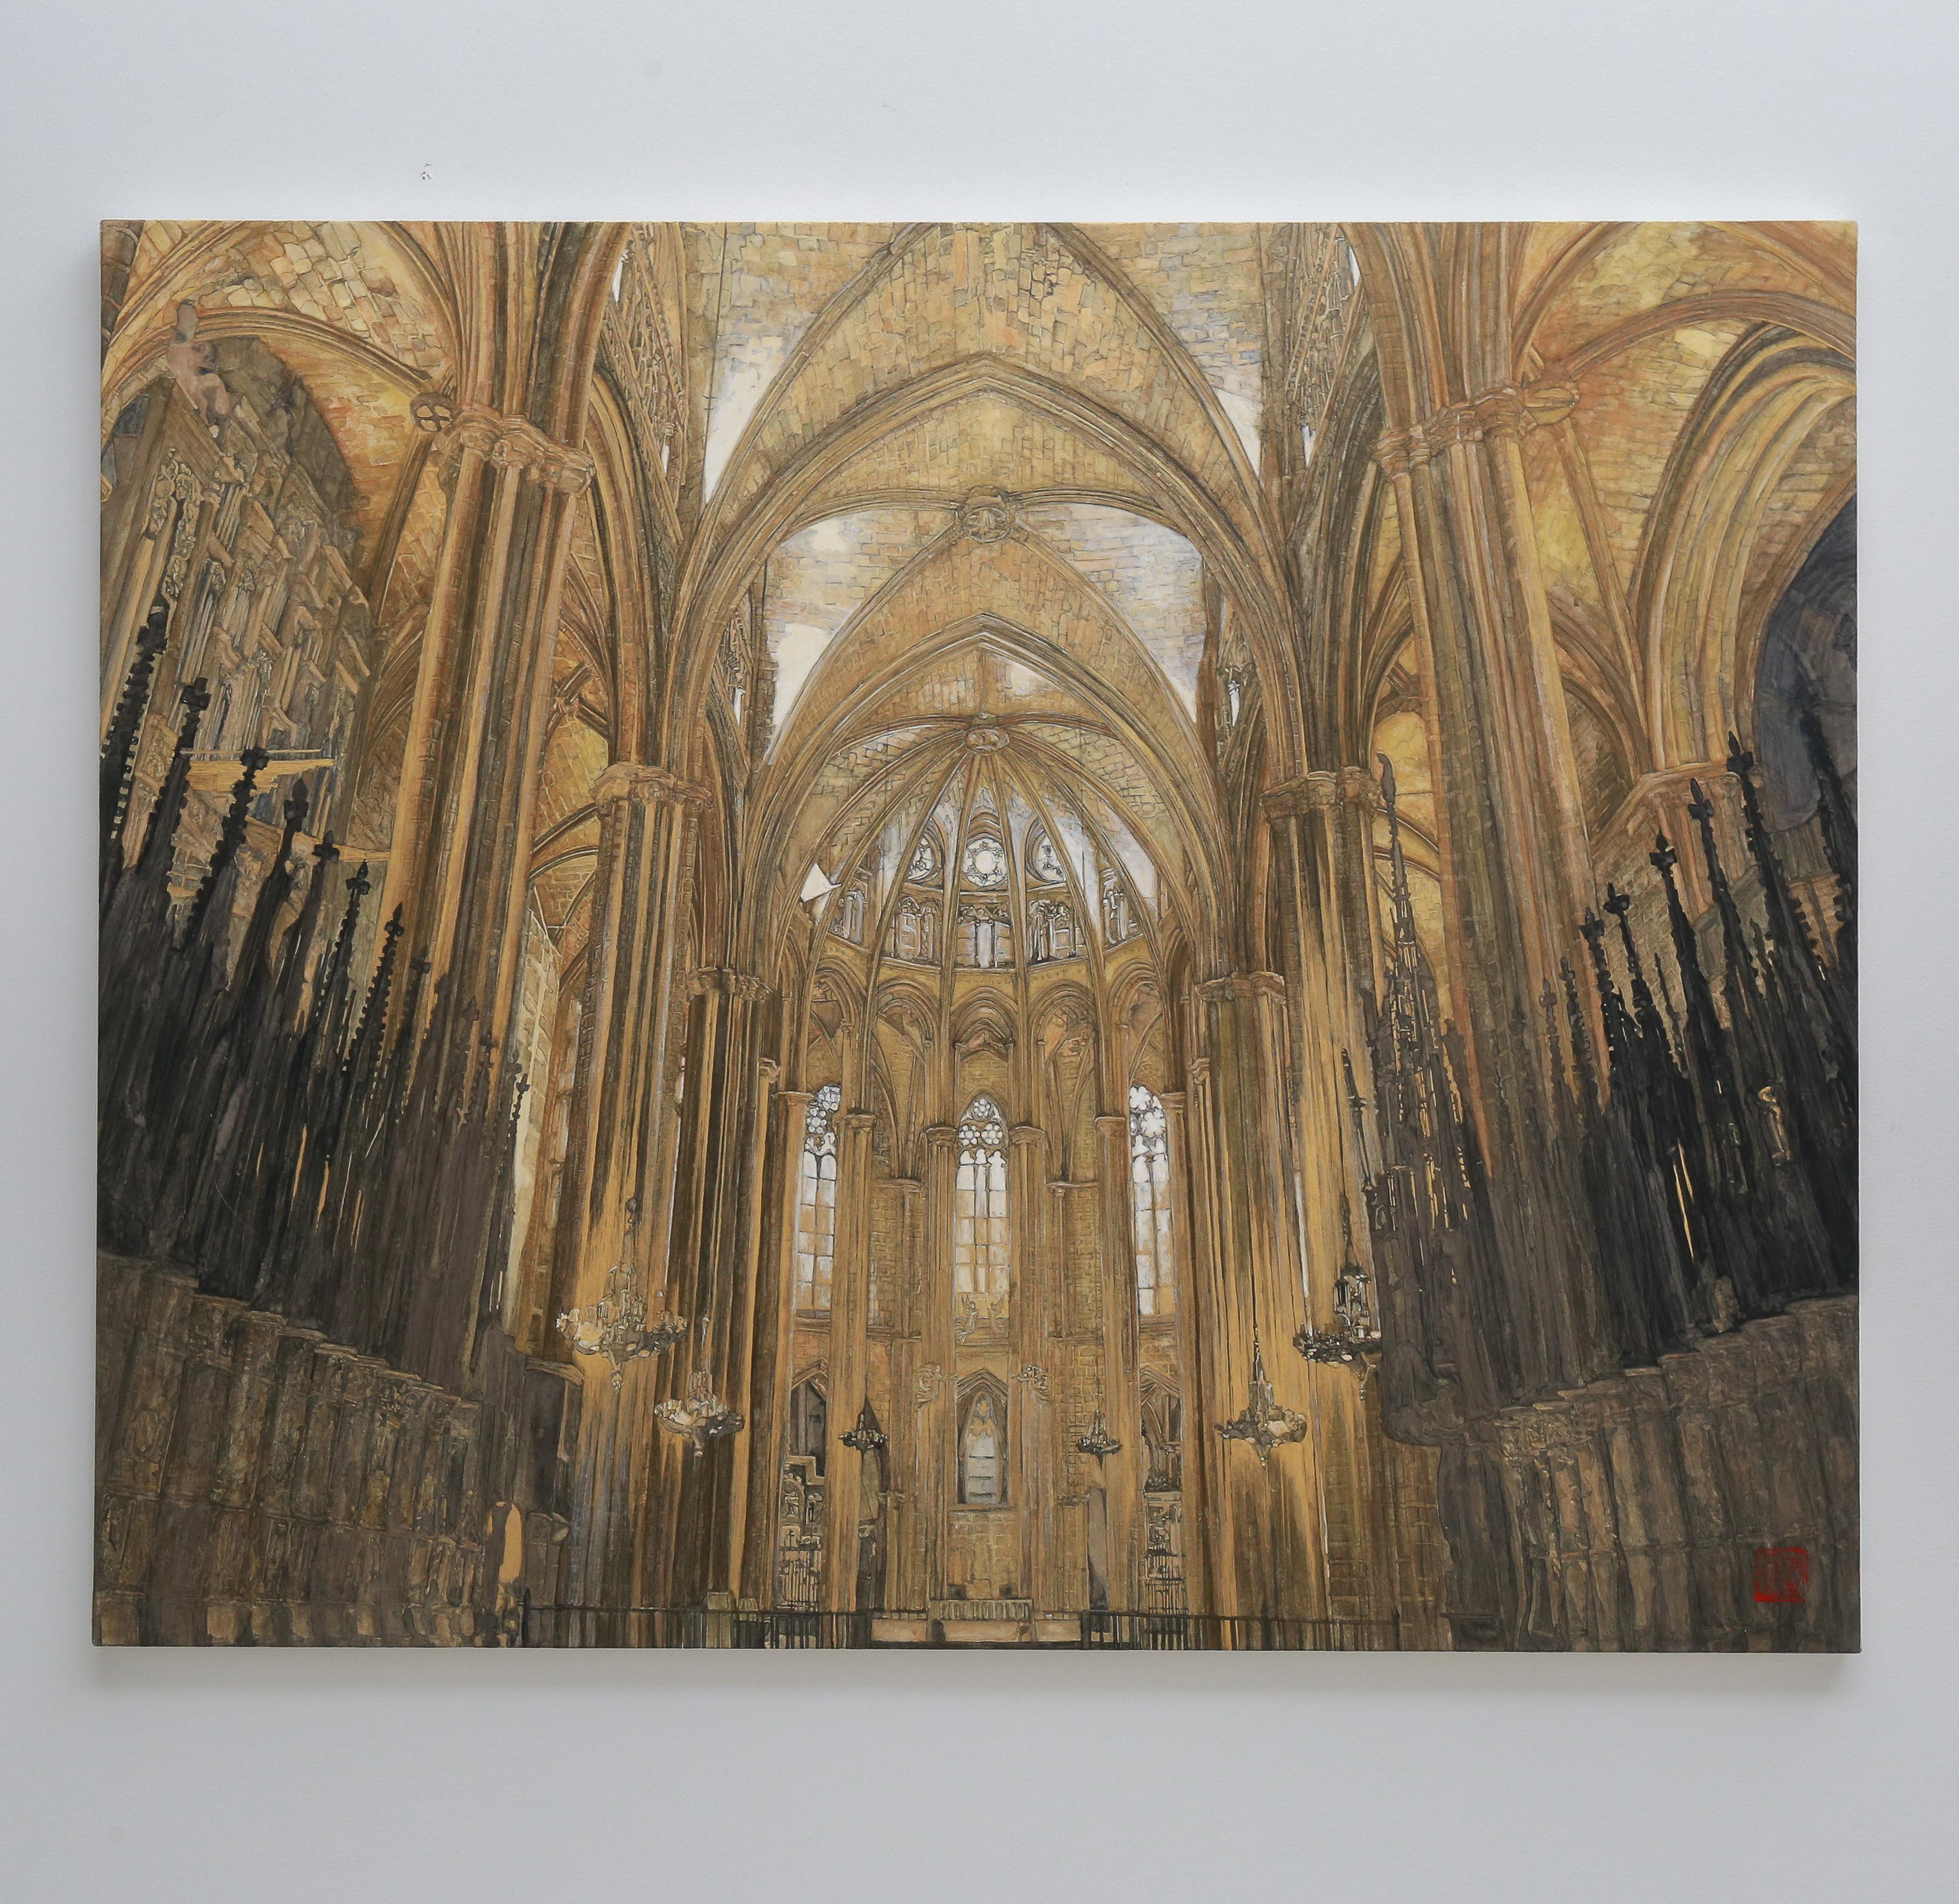 Barcelona Cathedral - 24k Gold and Minerals, Architecture, Gothic, Realism - Contemporary Painting by Maria Mitsumori